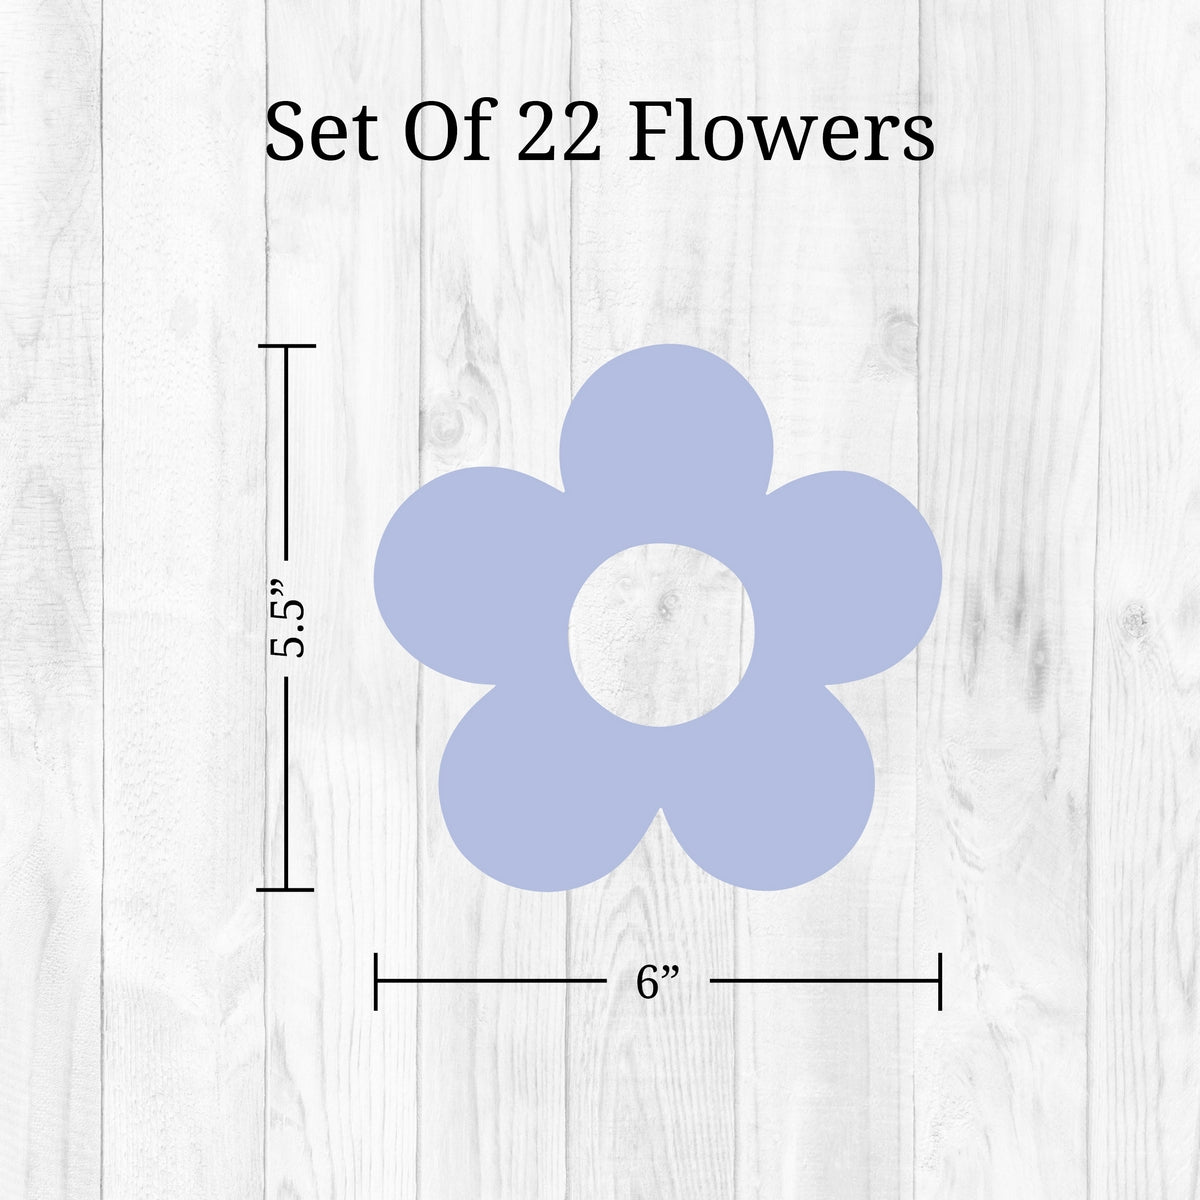 Pastel Flowers Wall Decals